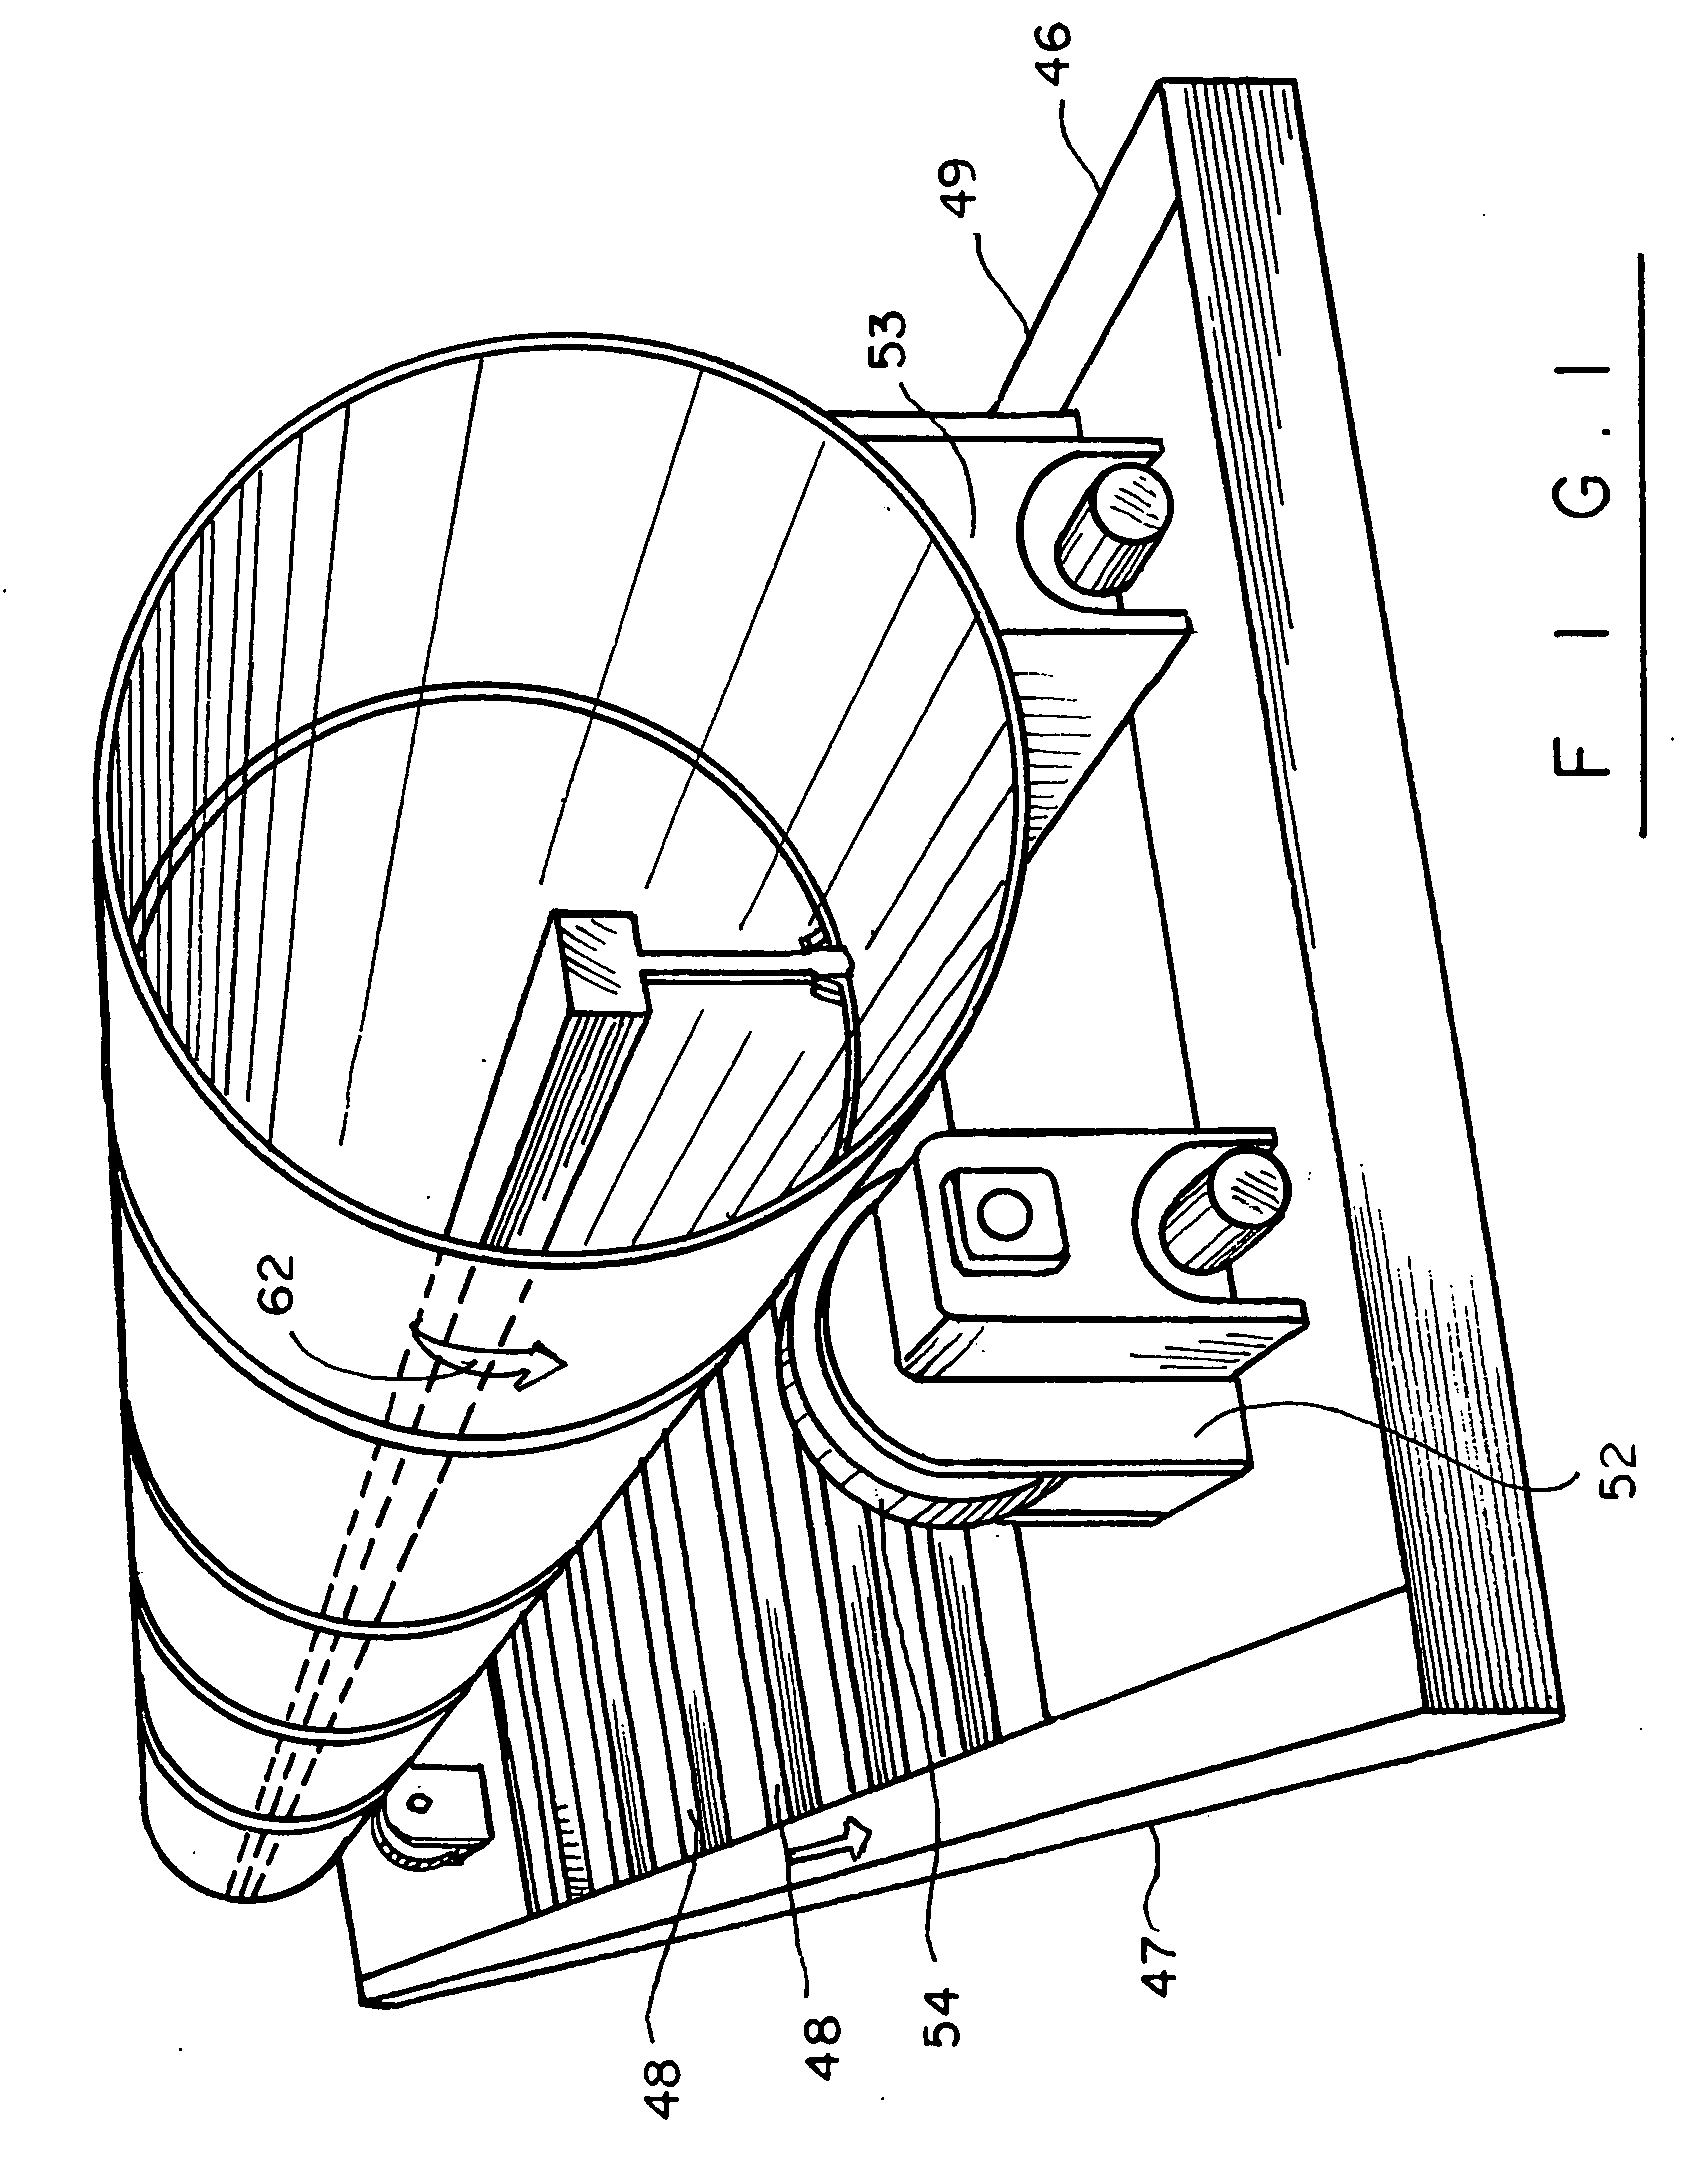 Inspection apparatus for tubular members